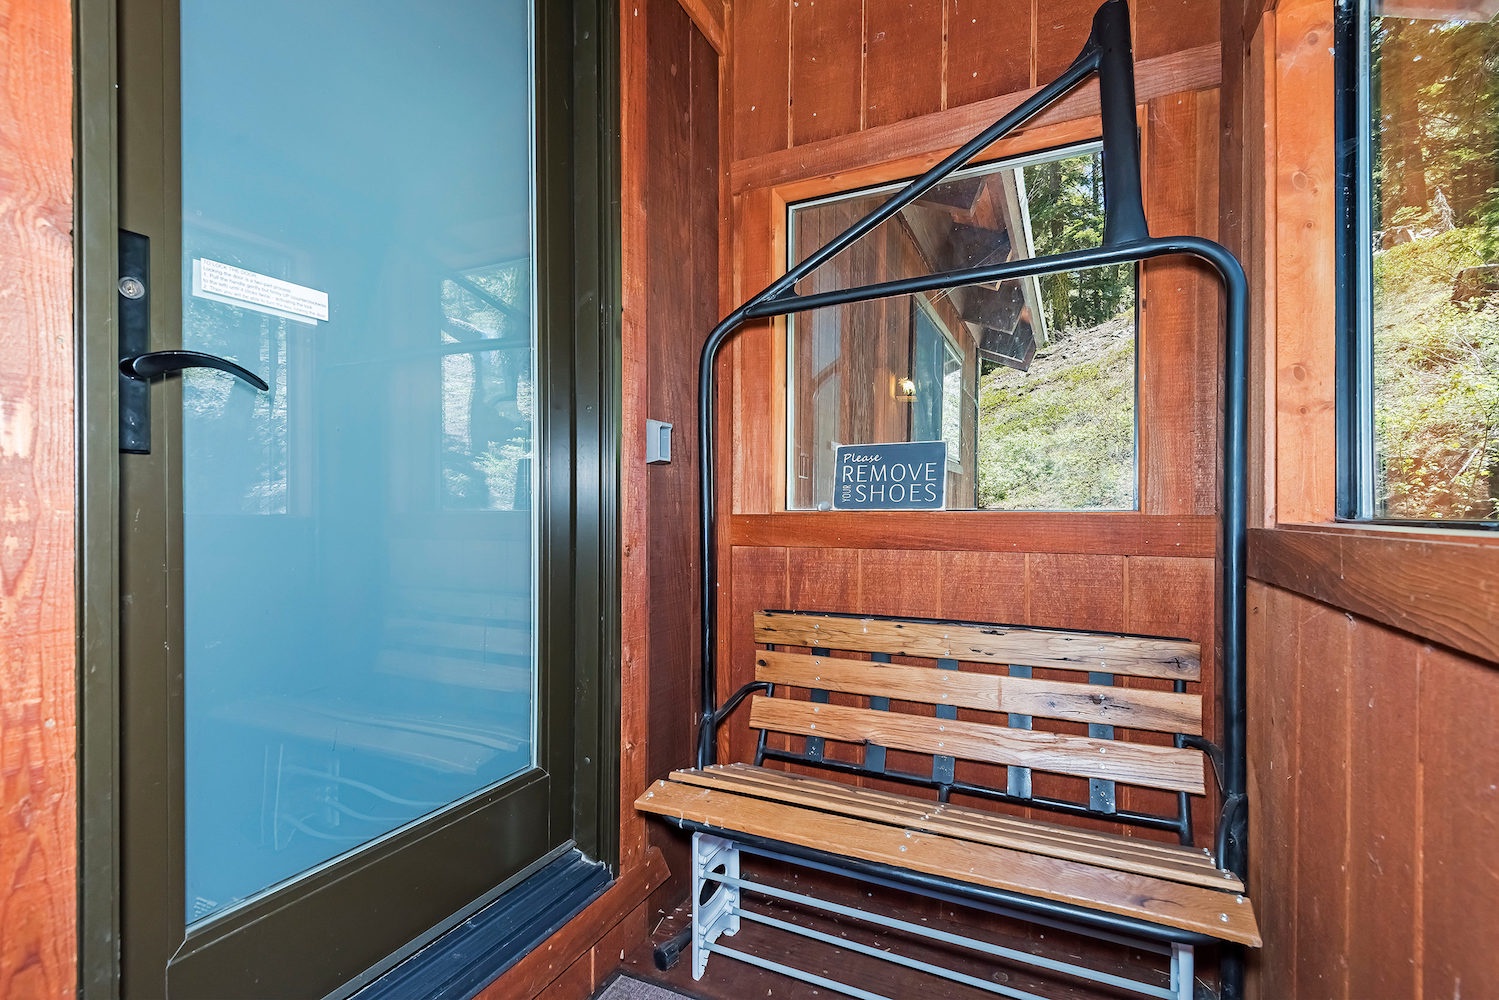 Your own ski lift chair right at the front door